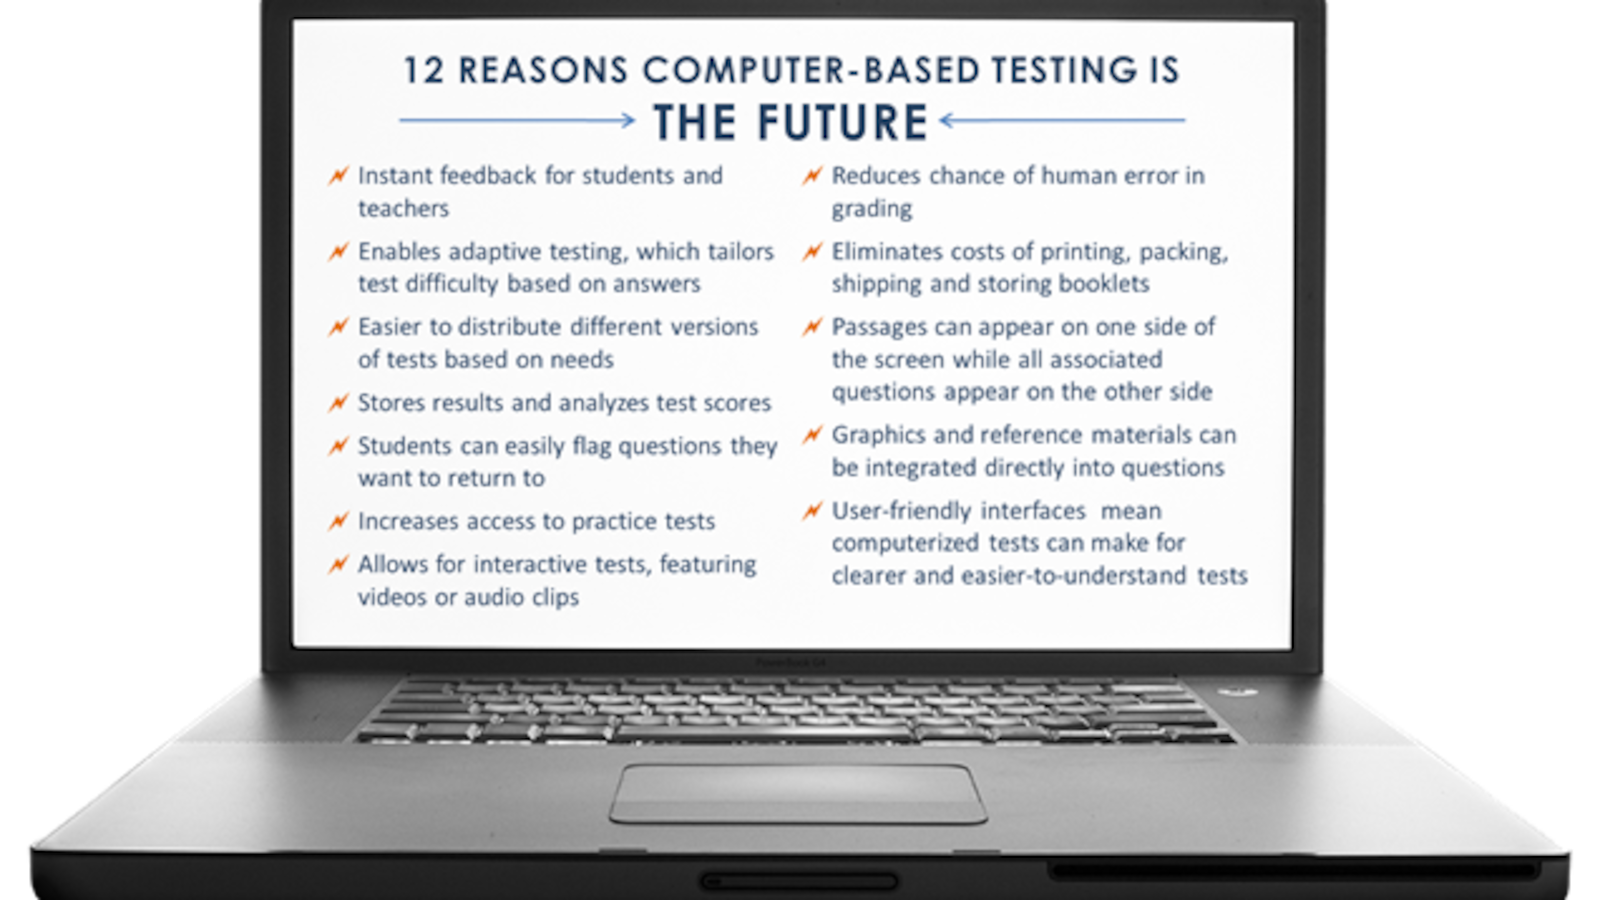 High Achievement New York, a coalition formed to promote the Common Core standards and testing, distributed this graphic advocating for computerized testing in June 2016.